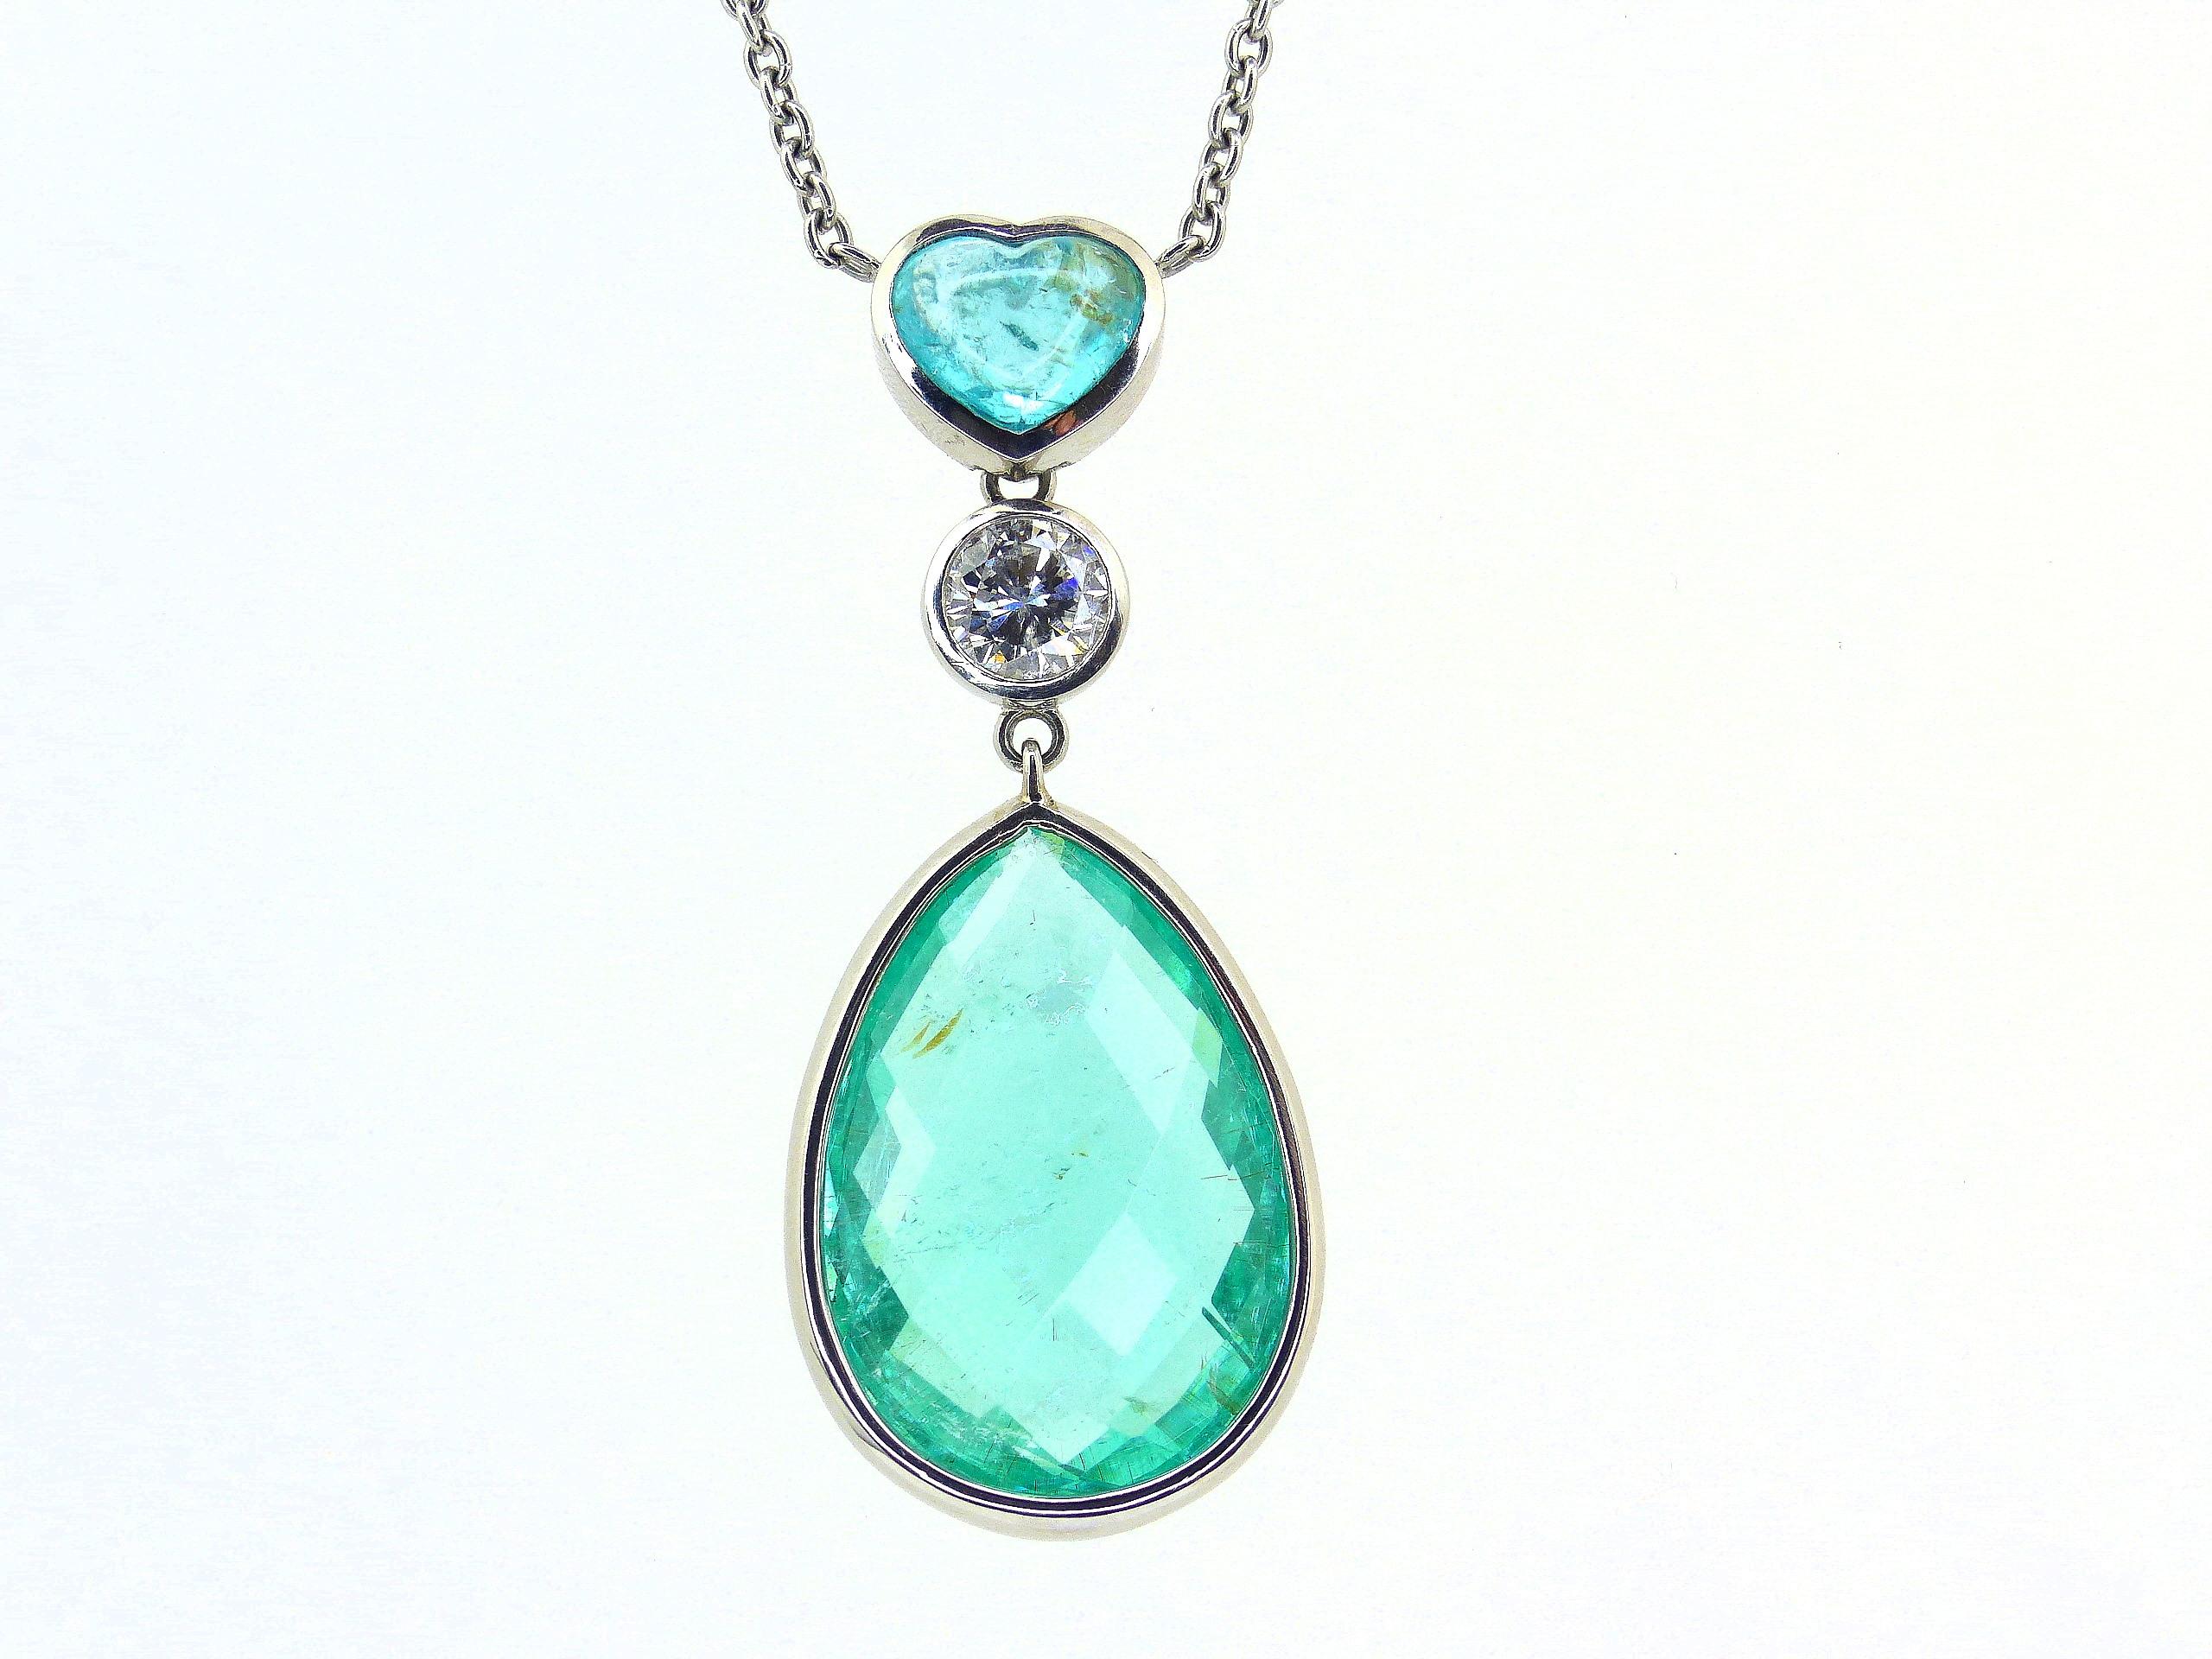 This 950/ Platinum (14g) Pendant is set with 1x fine Paraiba Cabouchon (heart-shape, 3.63cts), 10,5x9mm.

Paraiba Tourmalines are very popular and rare gemstones. The color is electric neon blue/greenish and has a kind of fluoreszens caused by